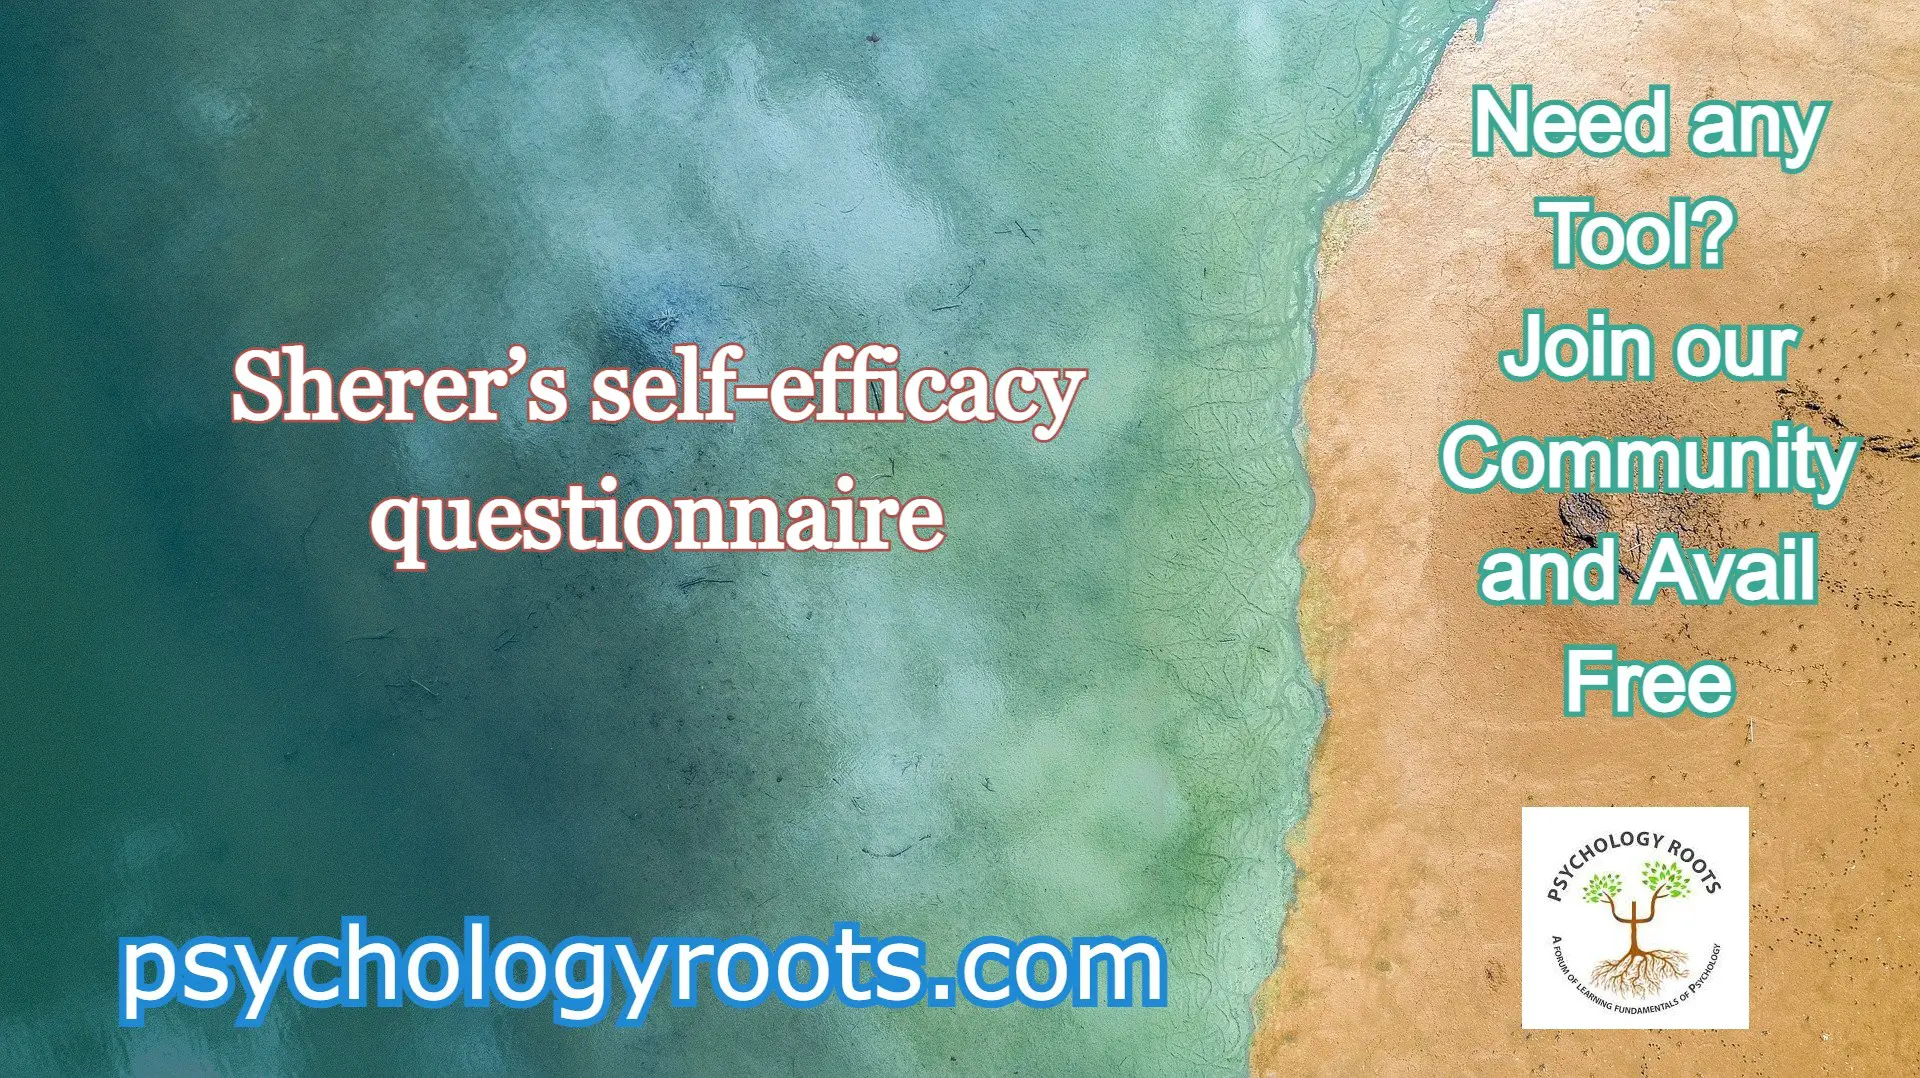  Sherer’s self-efficacy questionnaire